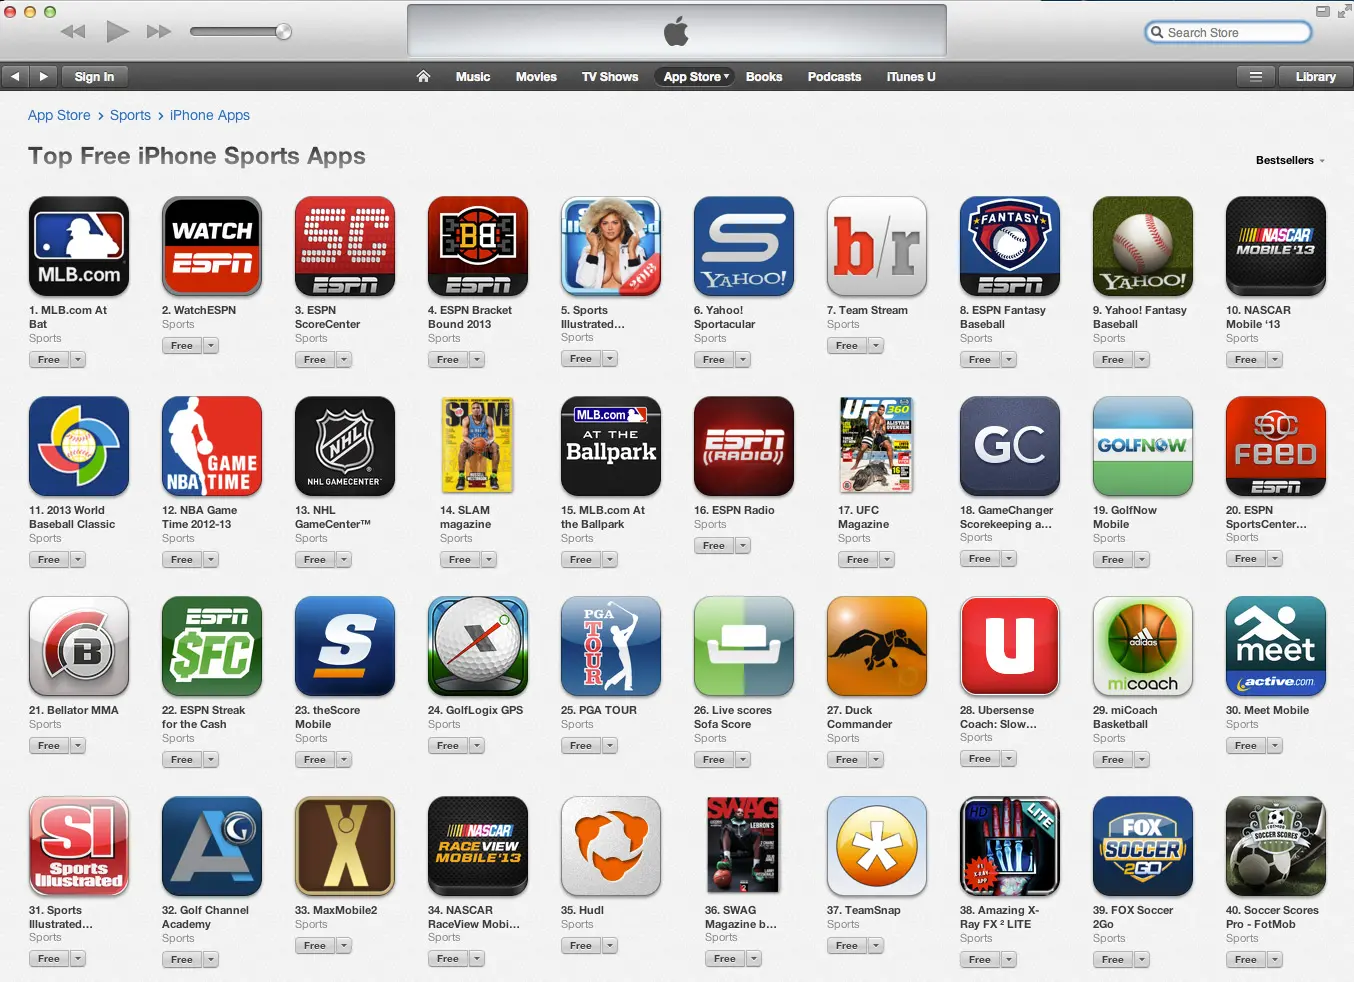 Featured image: TeamSnap Mobile App in iTunes Top 40 List